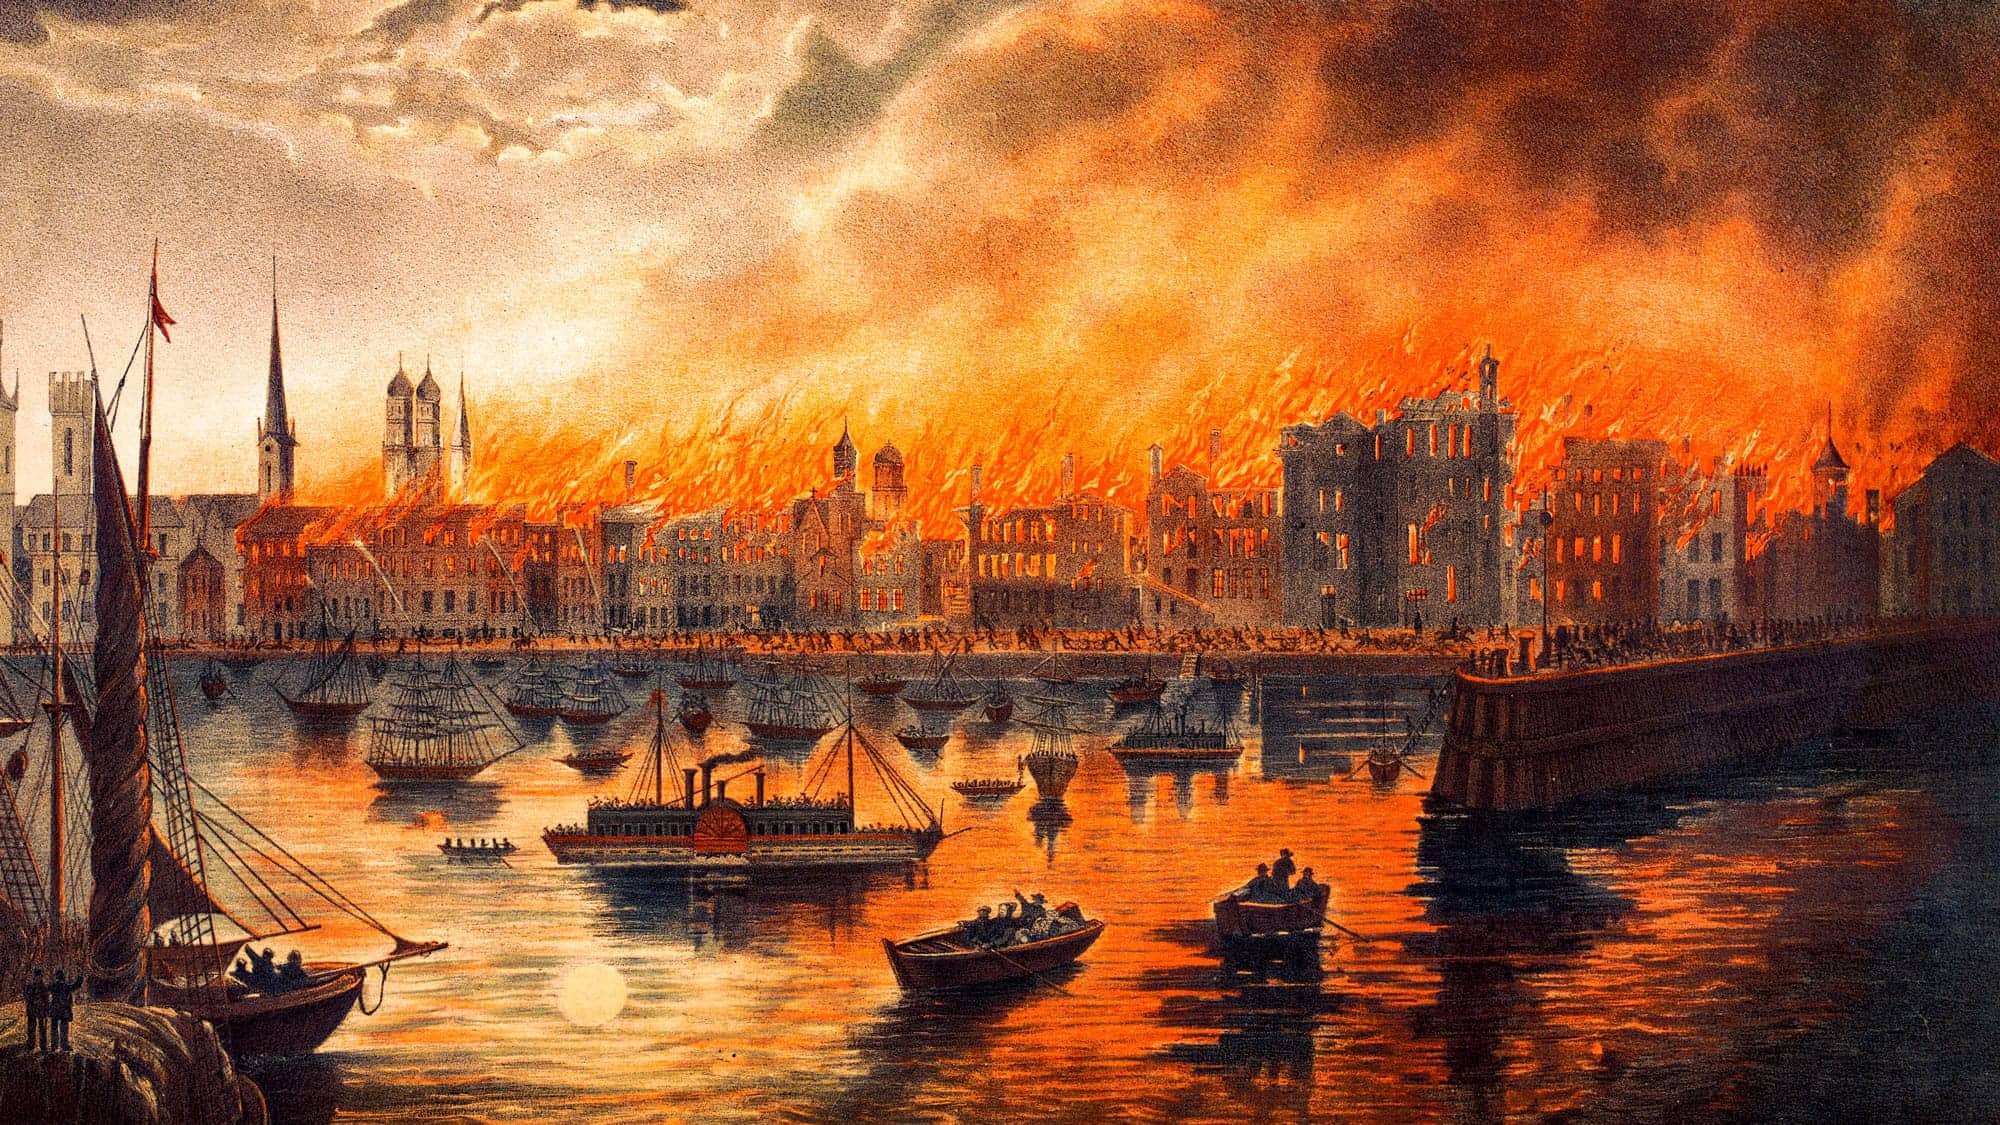 Vintage illustration of the Great Chicago Fire